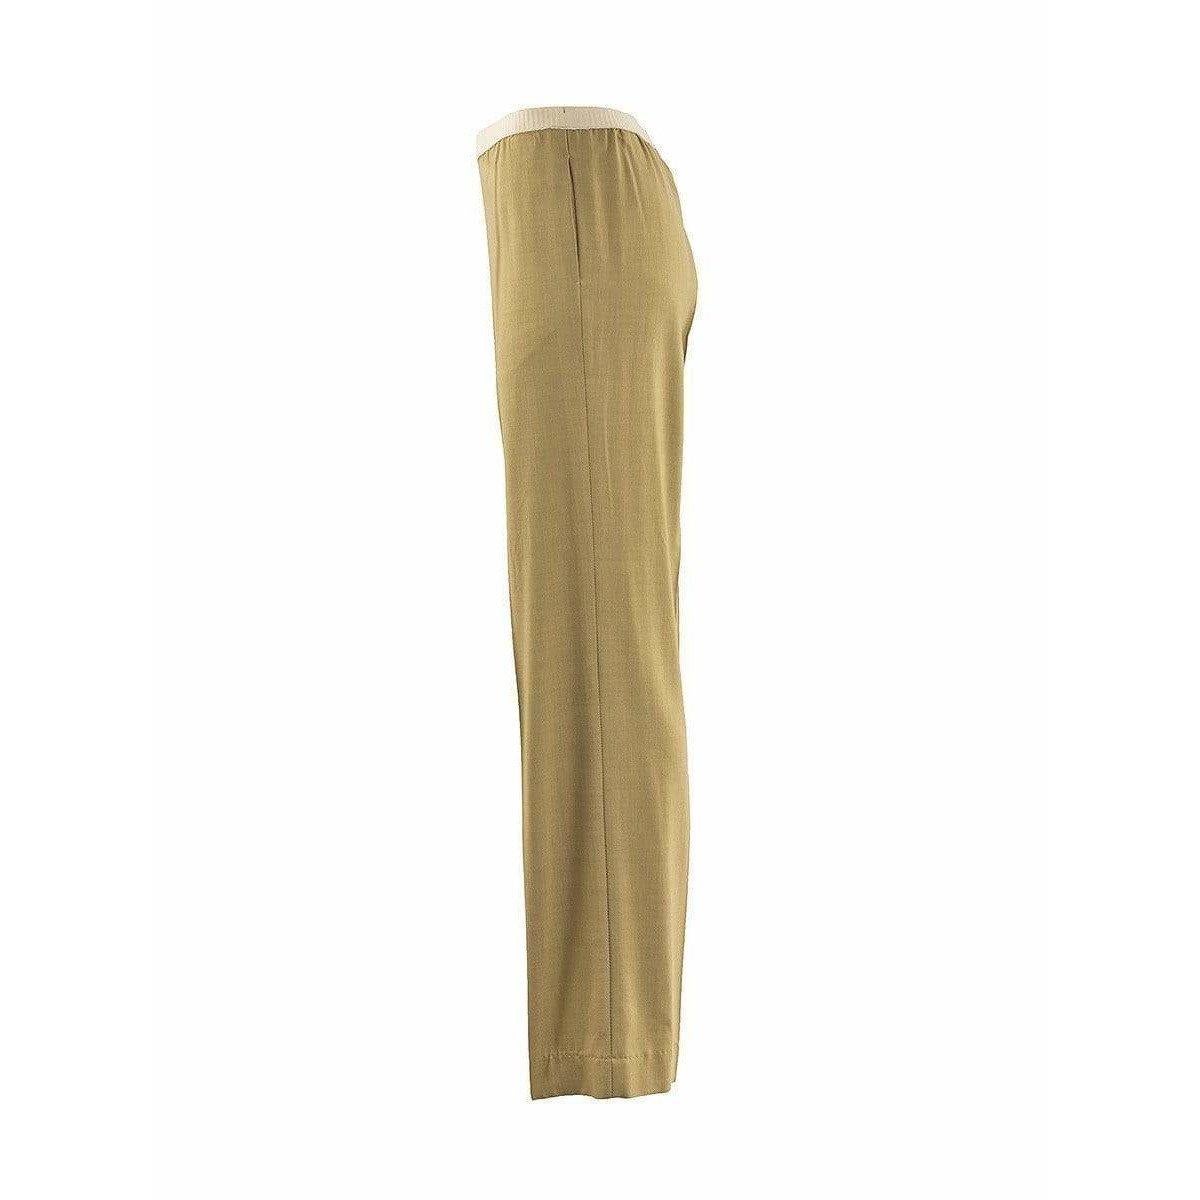 These cotton khaki straight leg pants have an easy elastic waistband and discreet side seam pockets from the Maison Martin Margiela Iconic Collection.